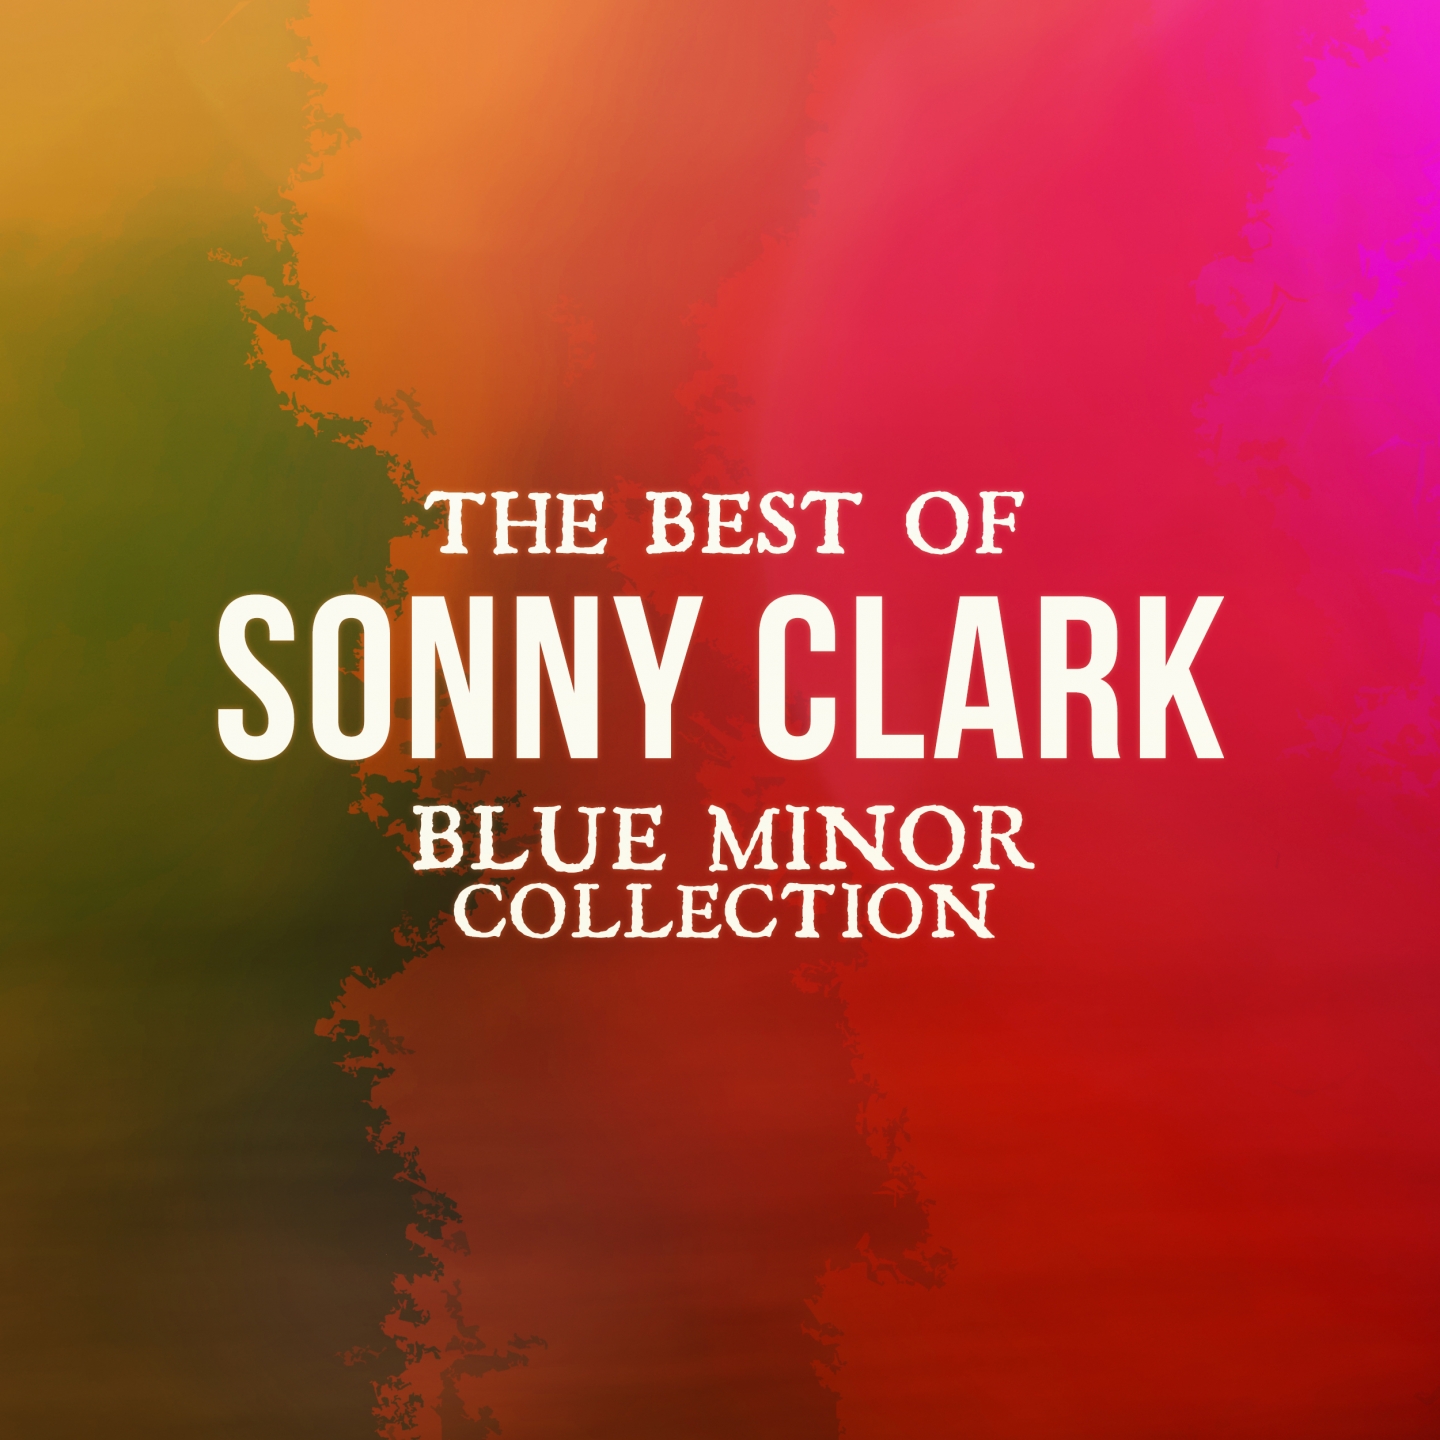 The Best of Sonny Clark (Blue Minor Collection)